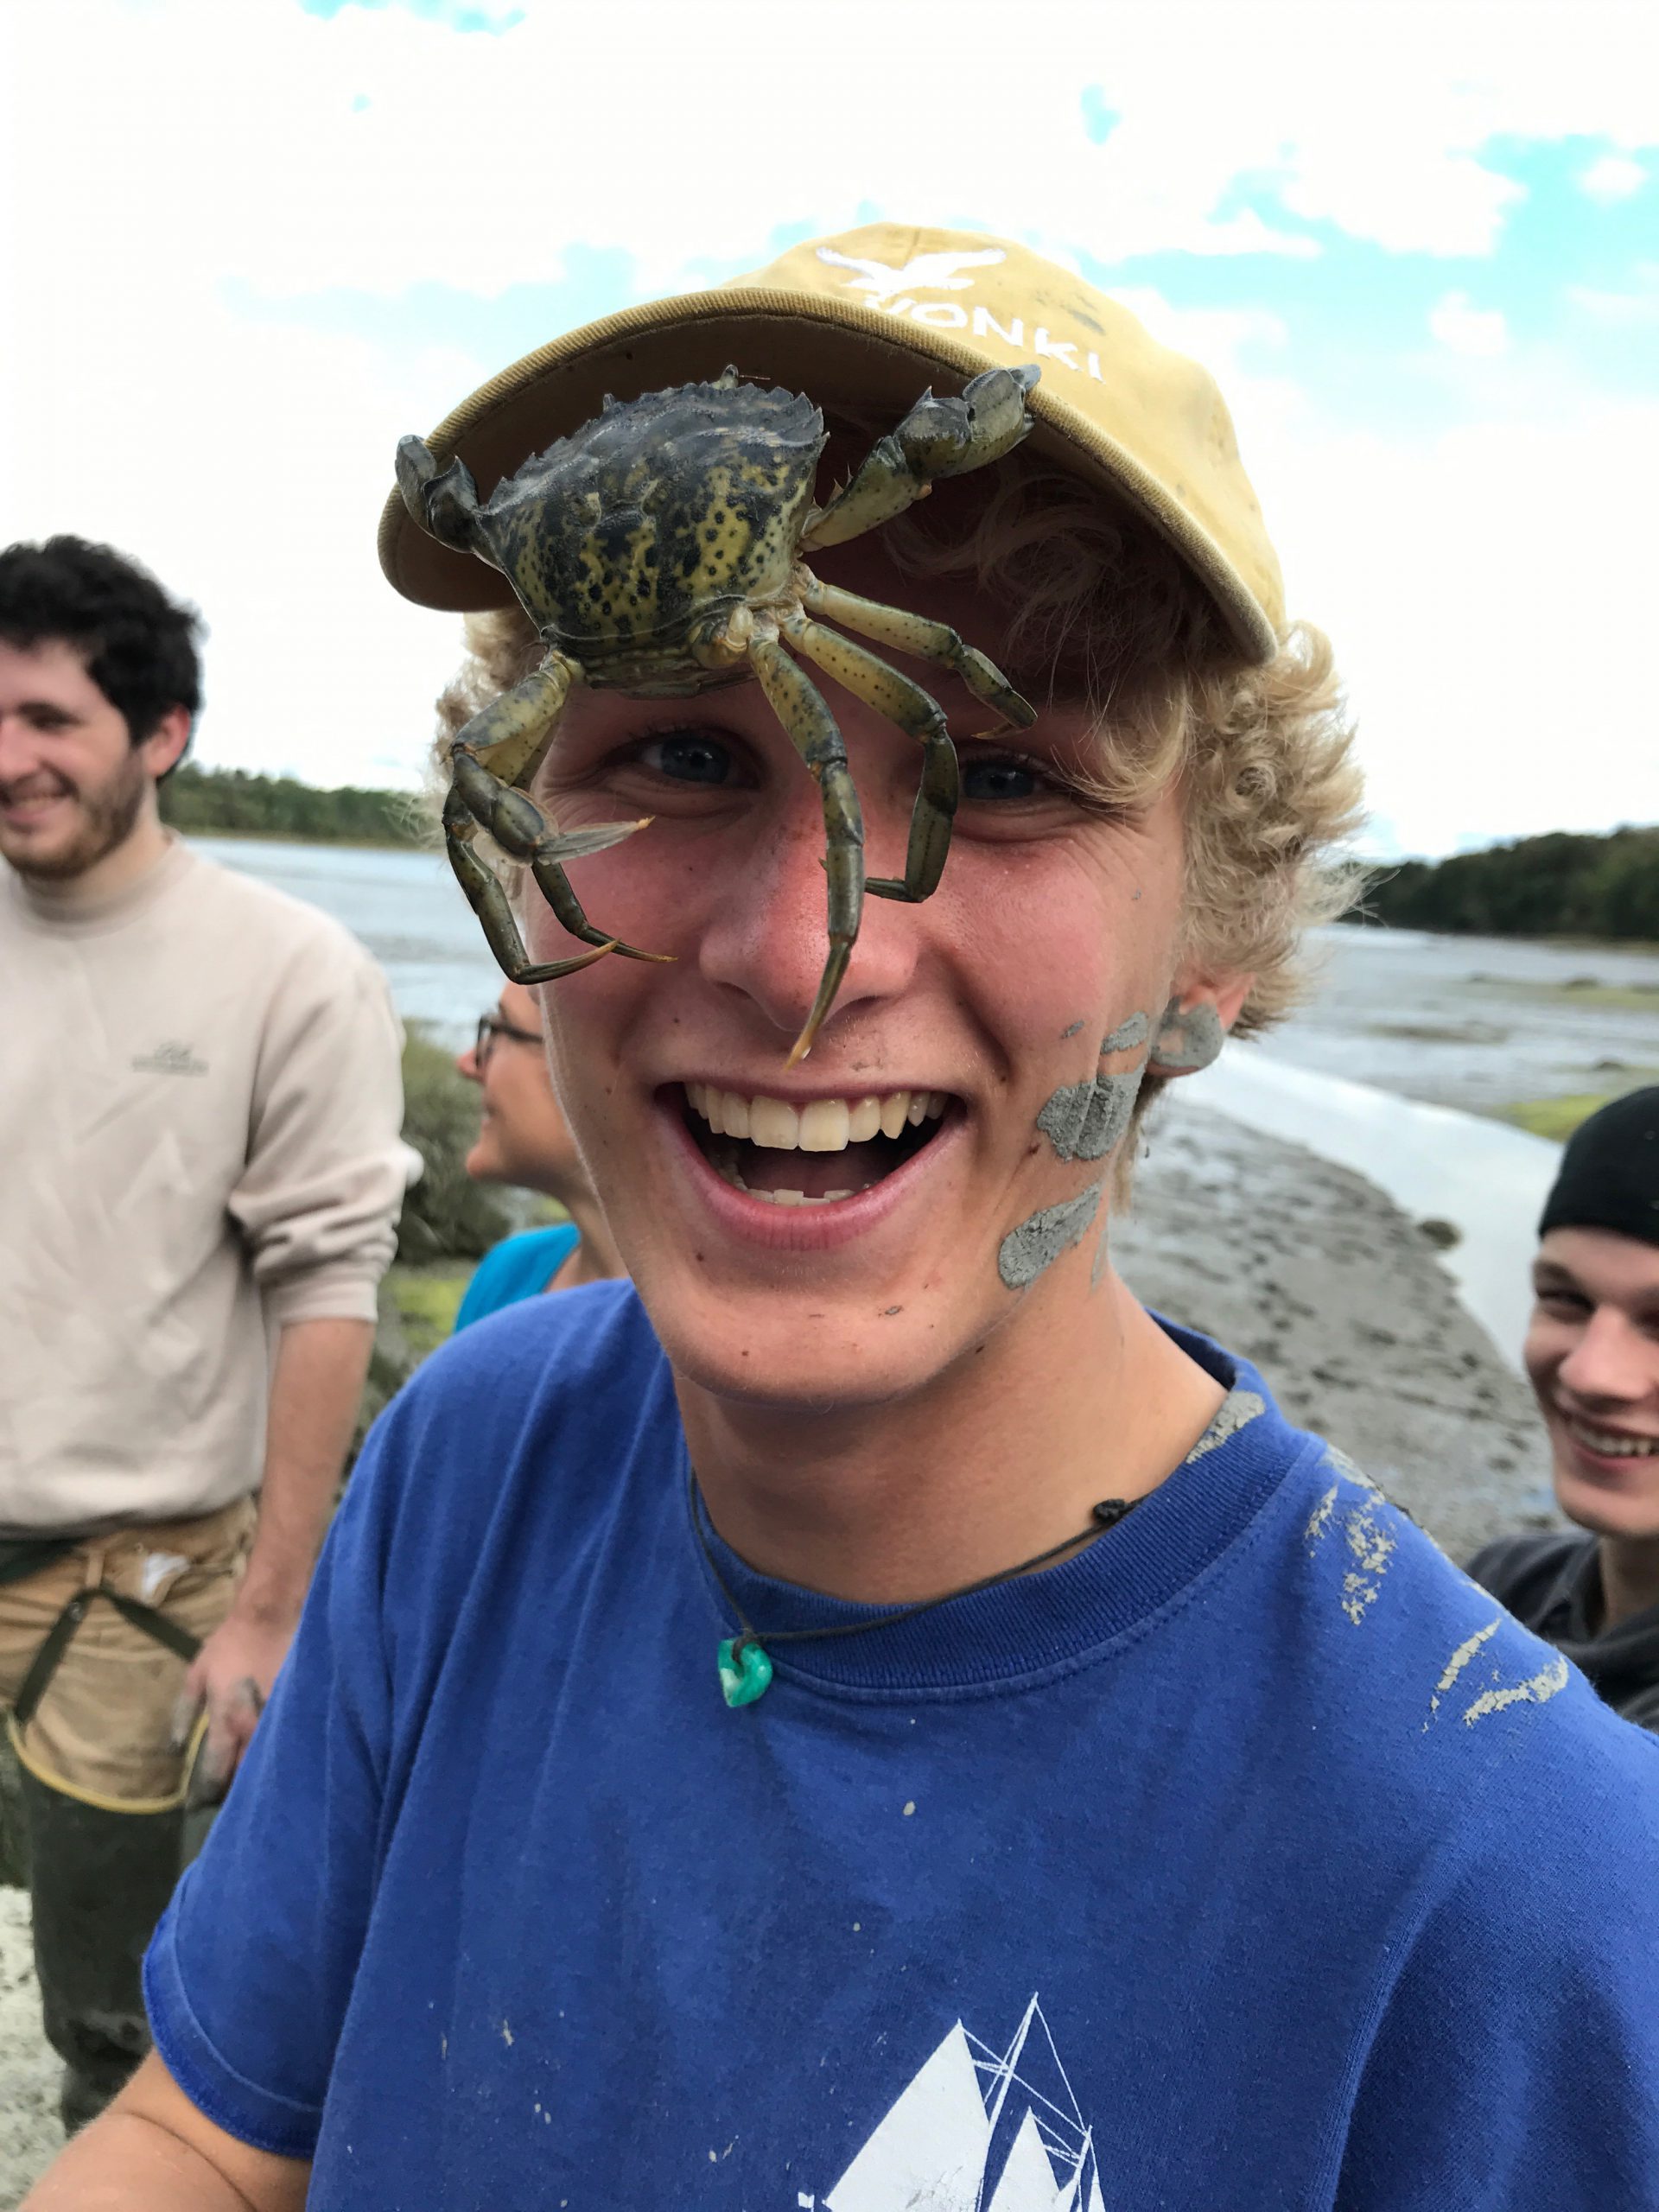 to show that field work is fun